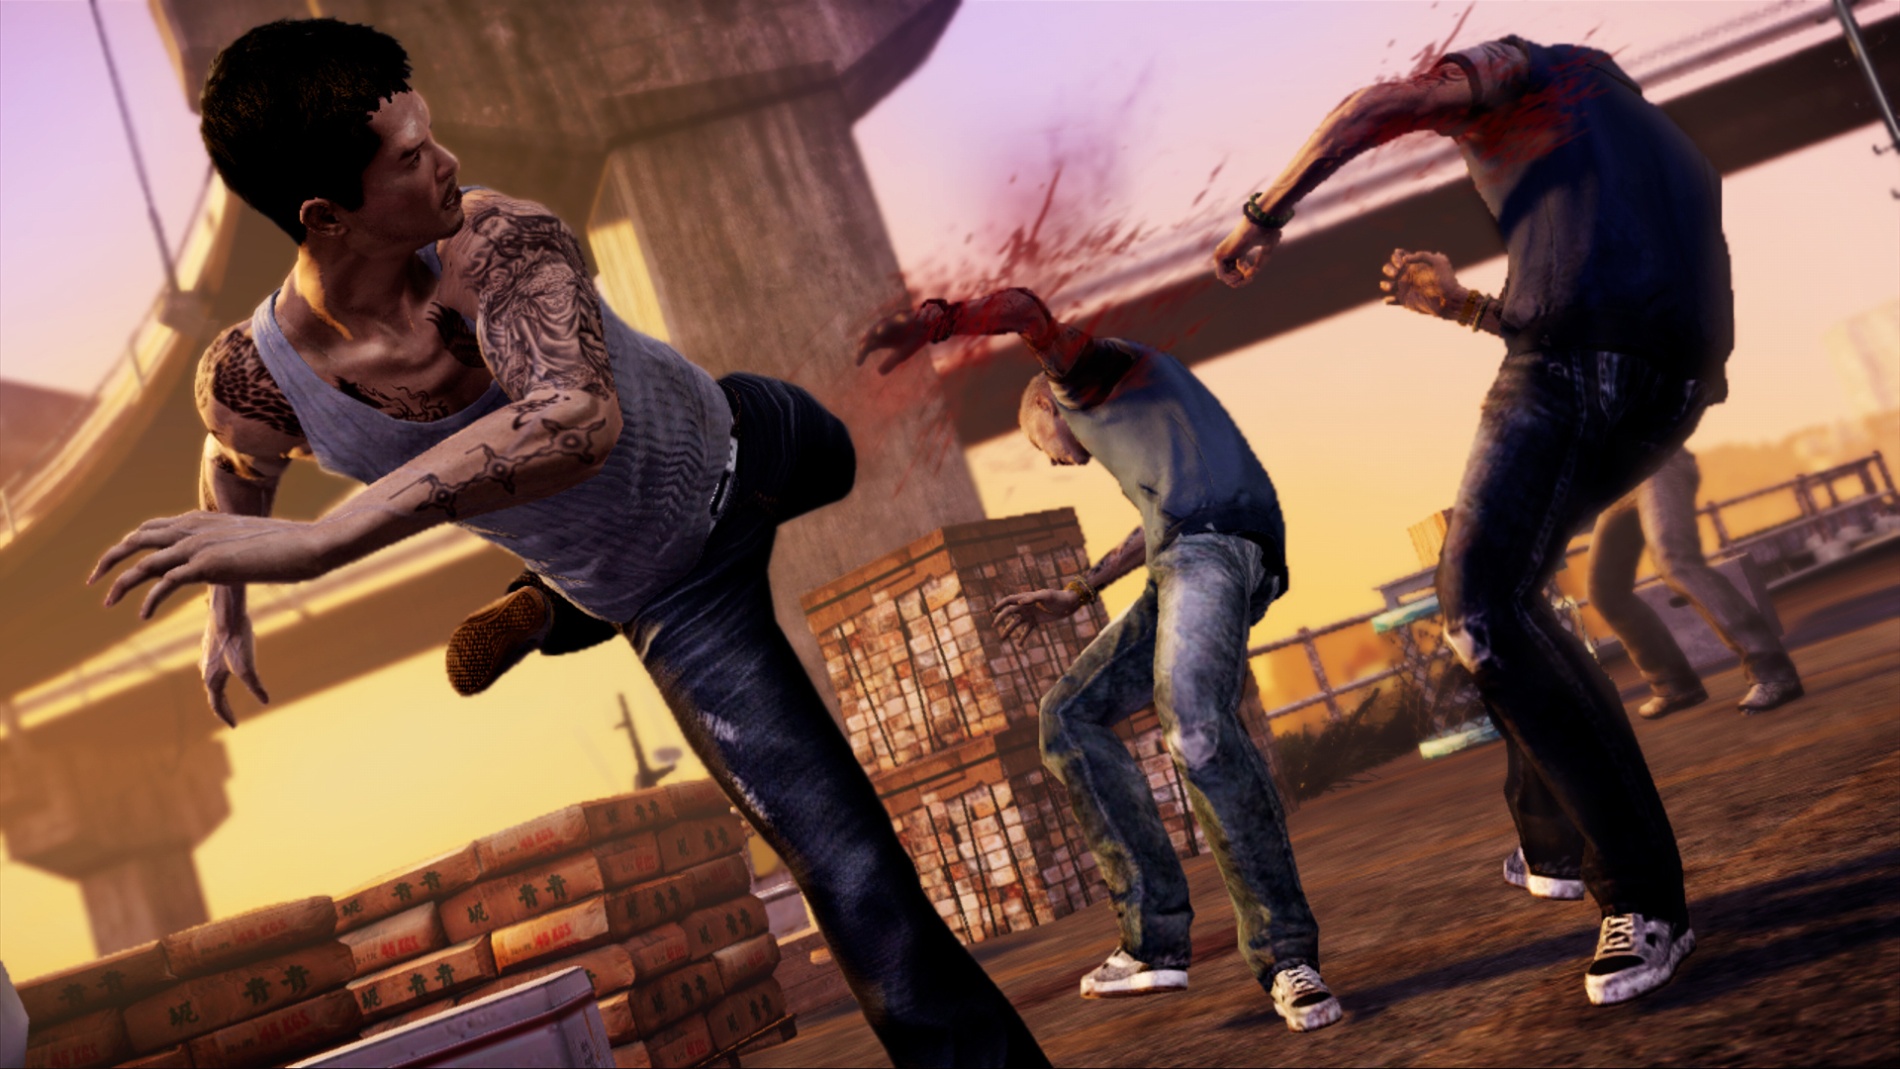 Square Enix's Sleeping Dogs Limited Edition will include bonus content -  GameSpot